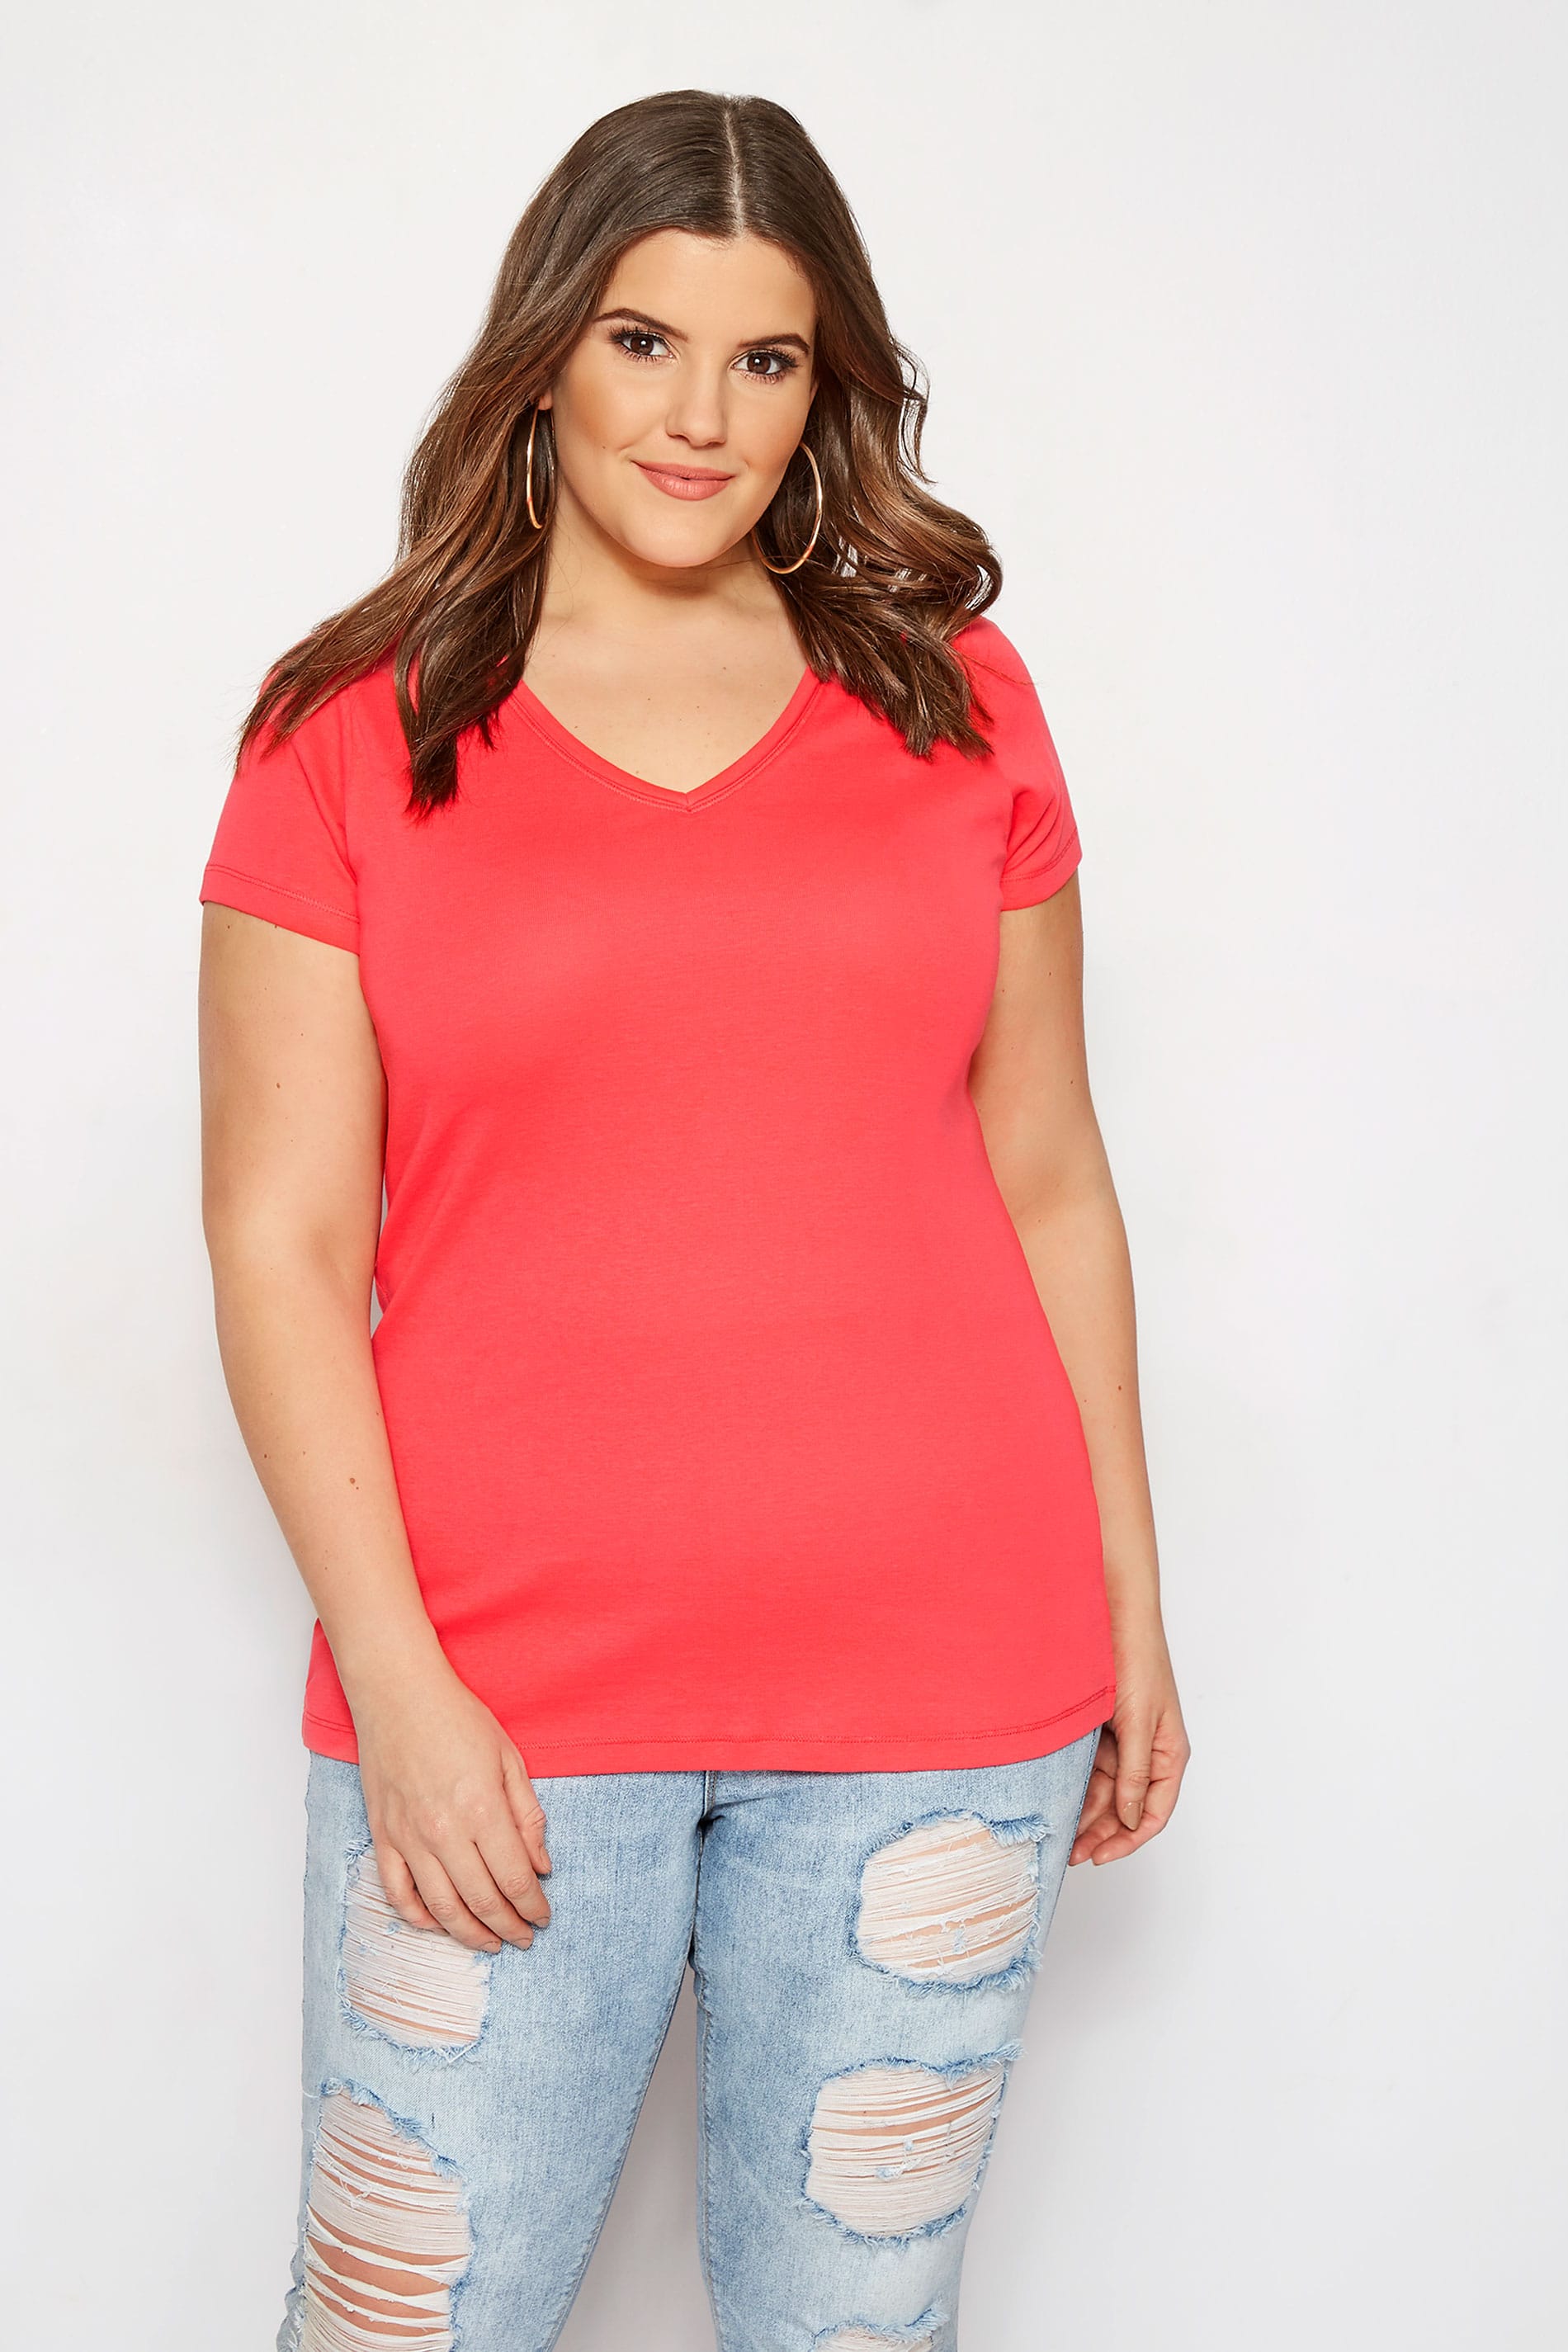 Plus Size Coral V Neck T Shirt Sizes 16 To 36 Yours Clothing